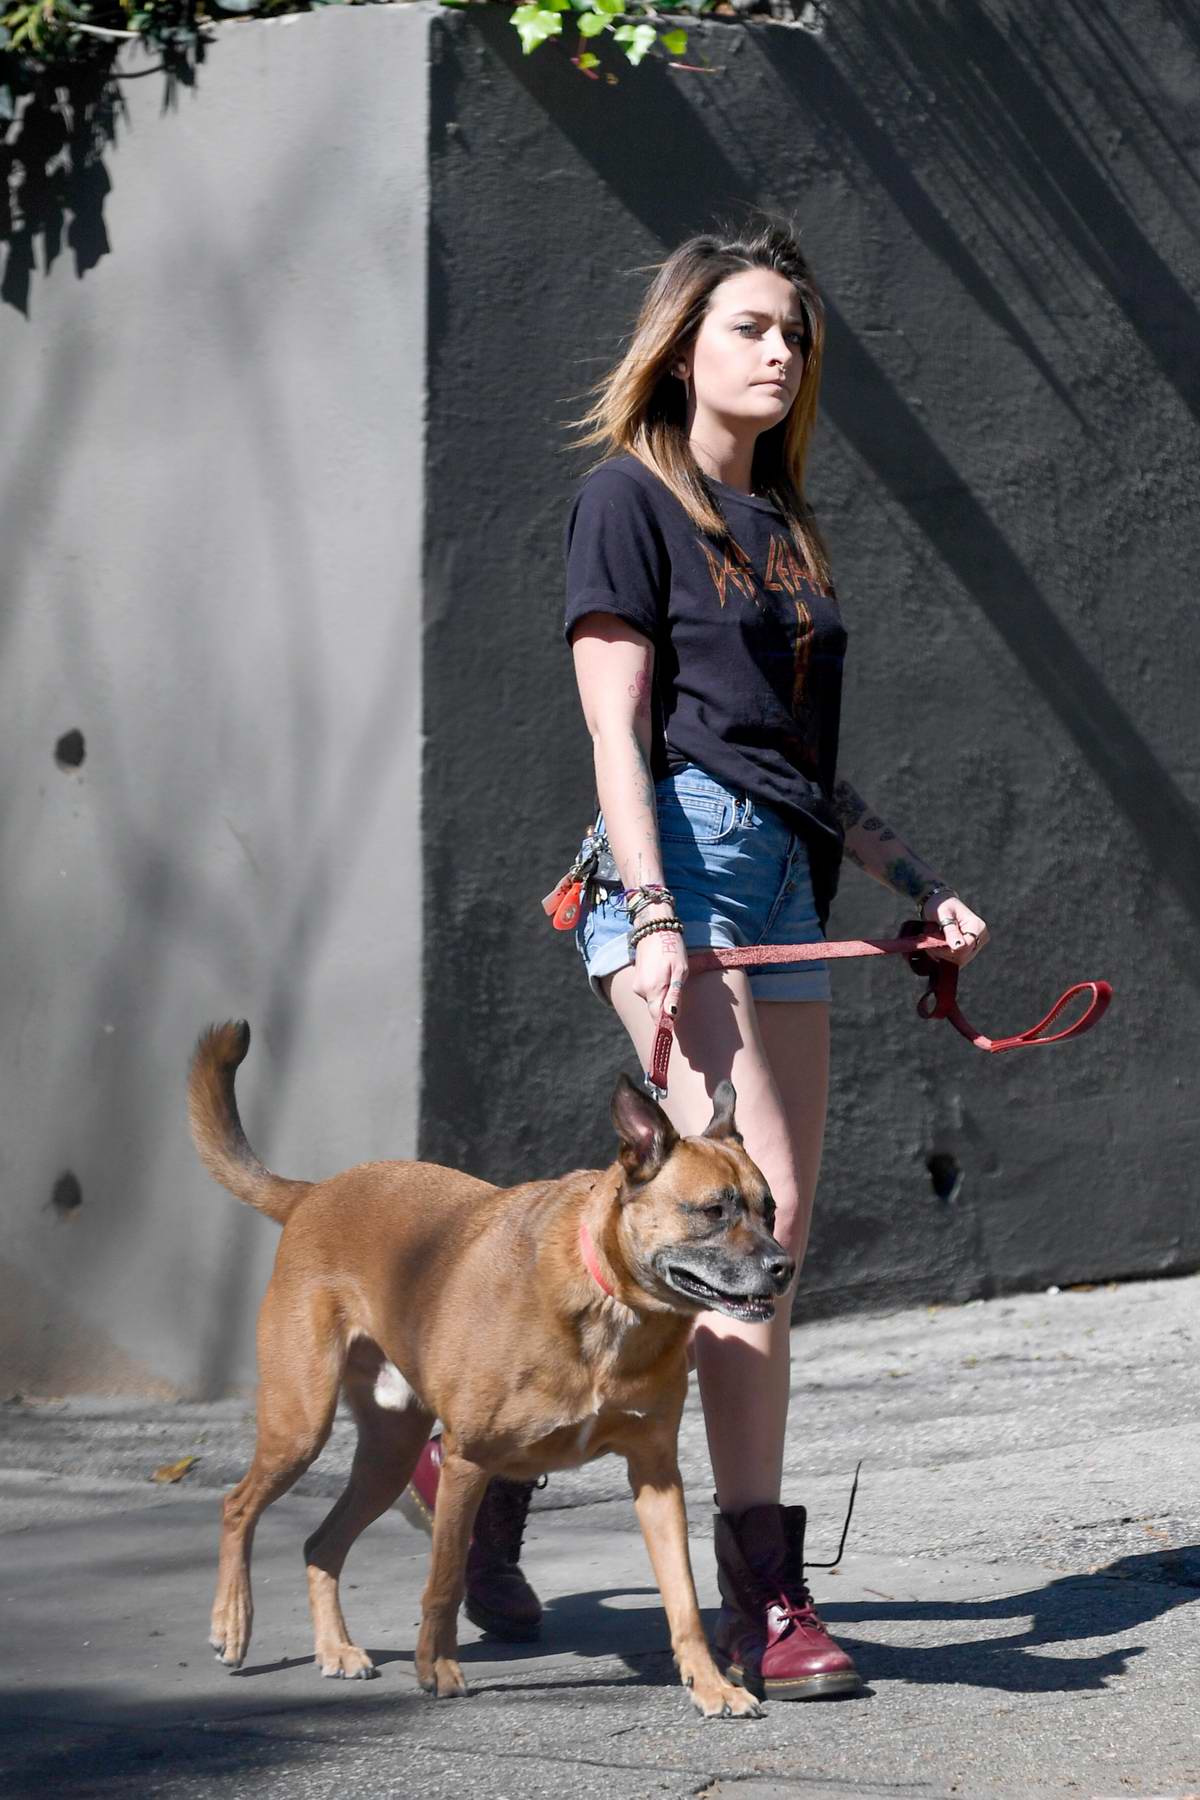 paris jackson steps out in a tee and denim shorts to walk her dog